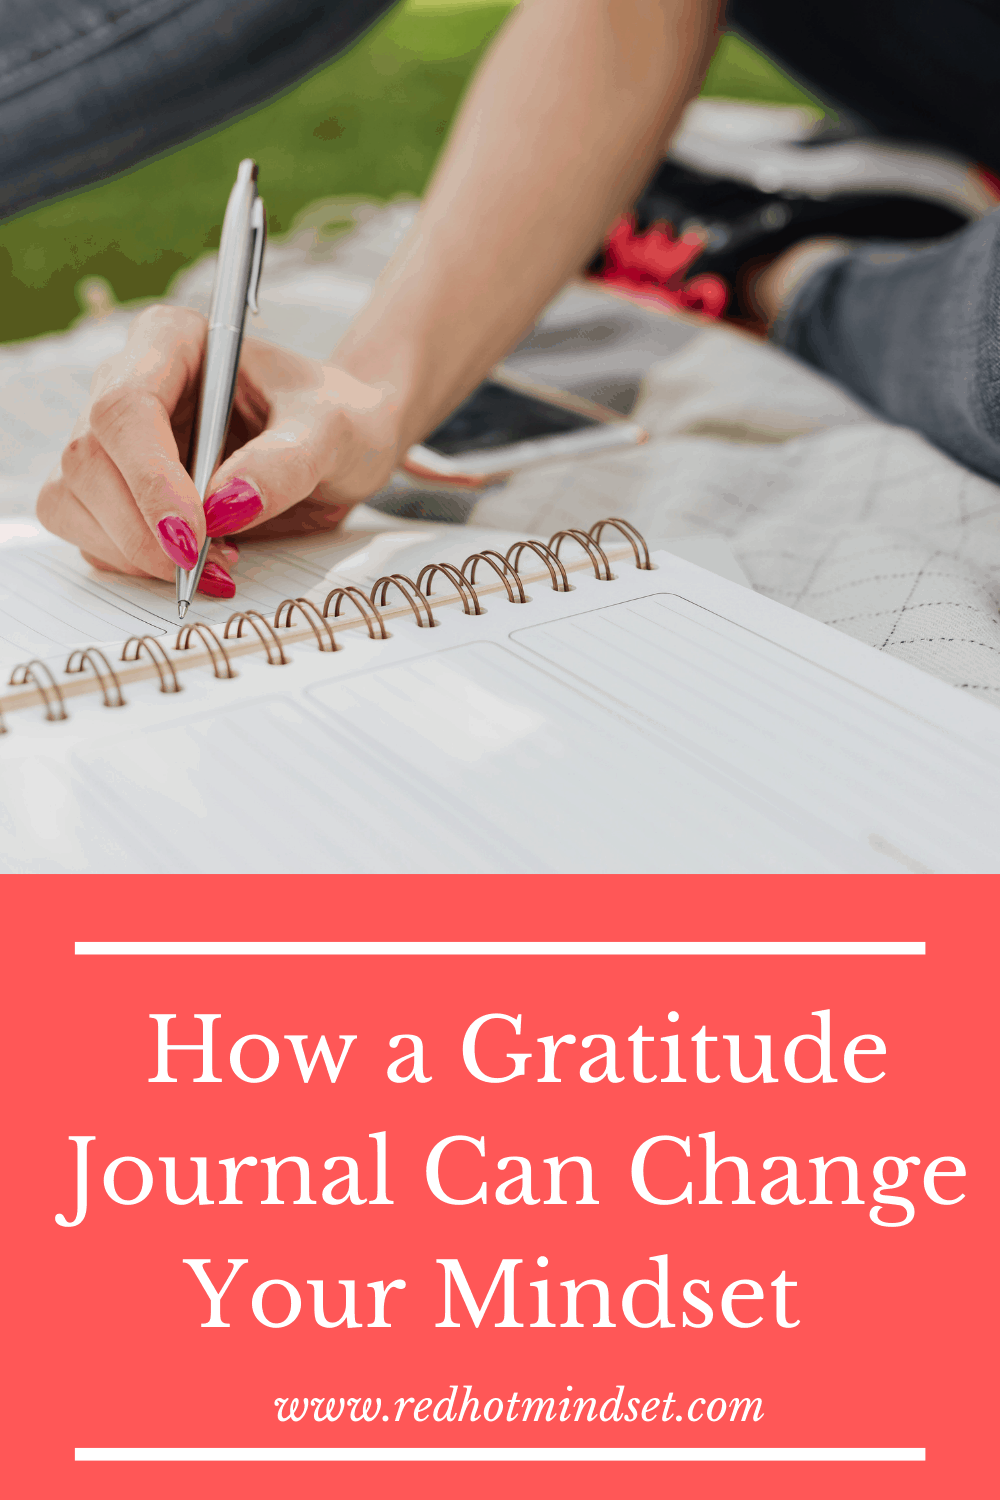 How to Begin a Gratitude Routine & Journal